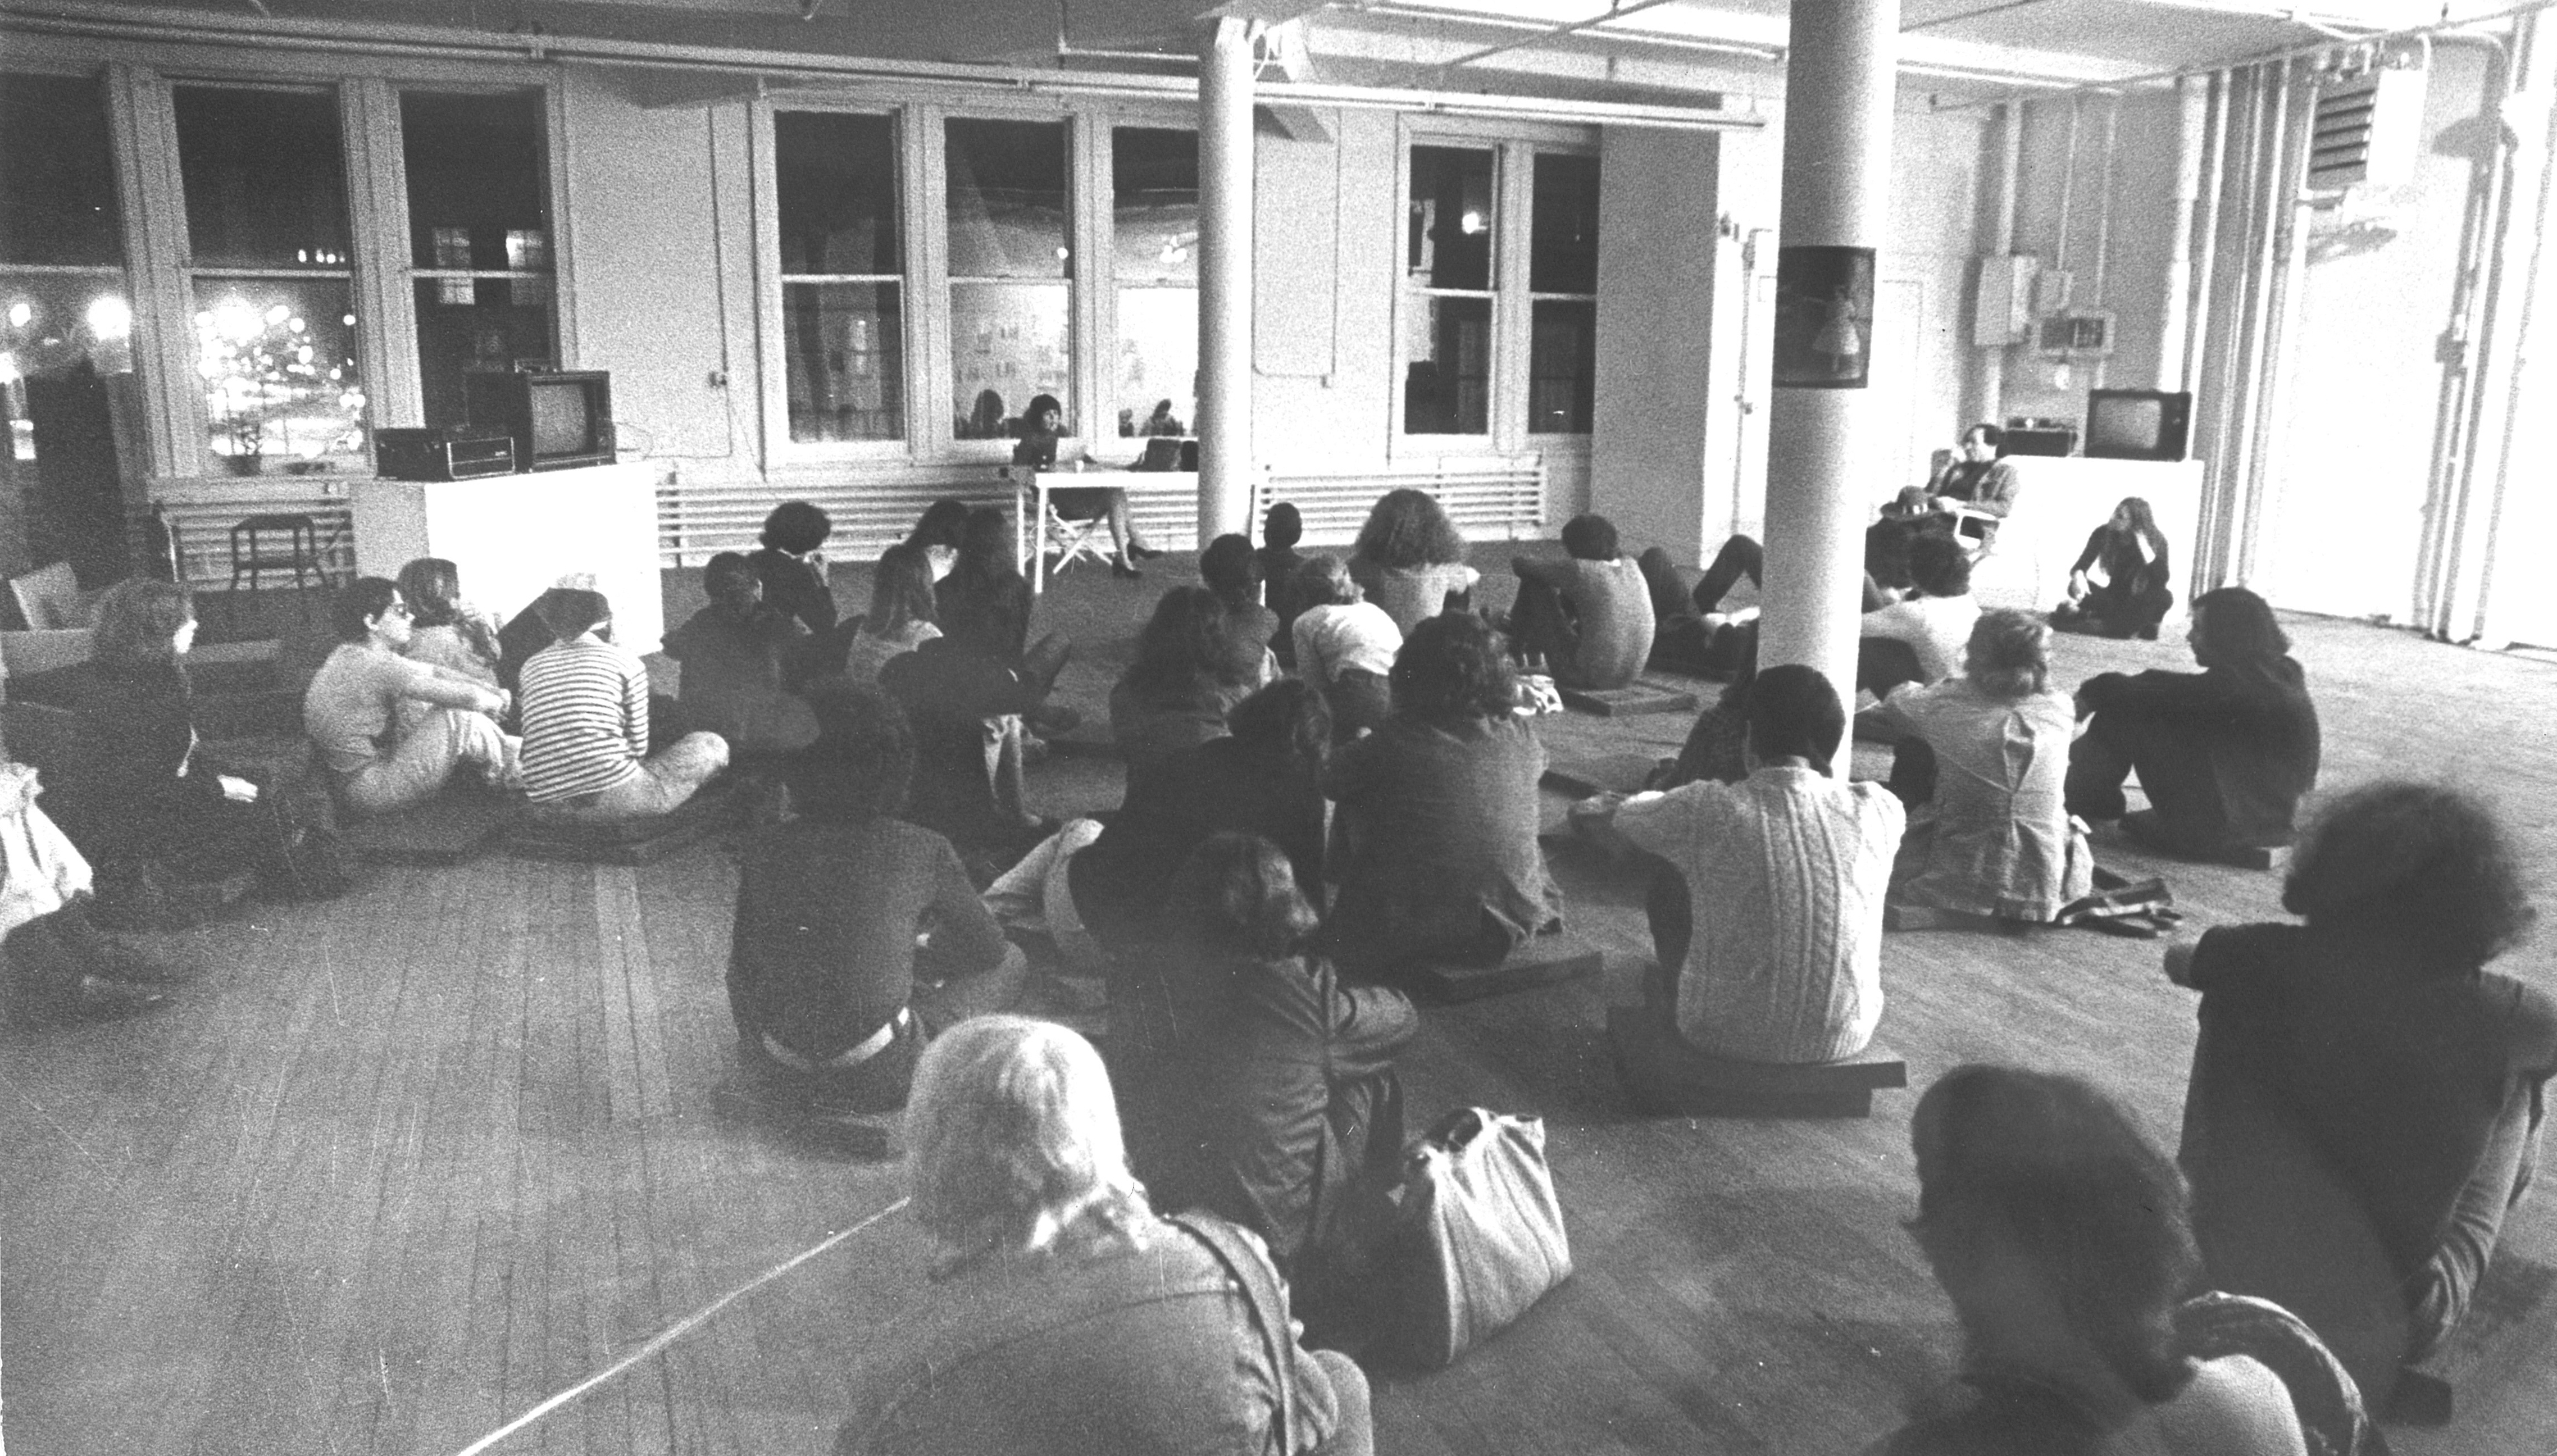 Audience gathered for a poetry reading by Jennifer Bartlett, April 23, 1974, as part of “PersonA,” a performance and film series curated by Edit deAk for Artists Space, April 23 – April 26, 1974. 